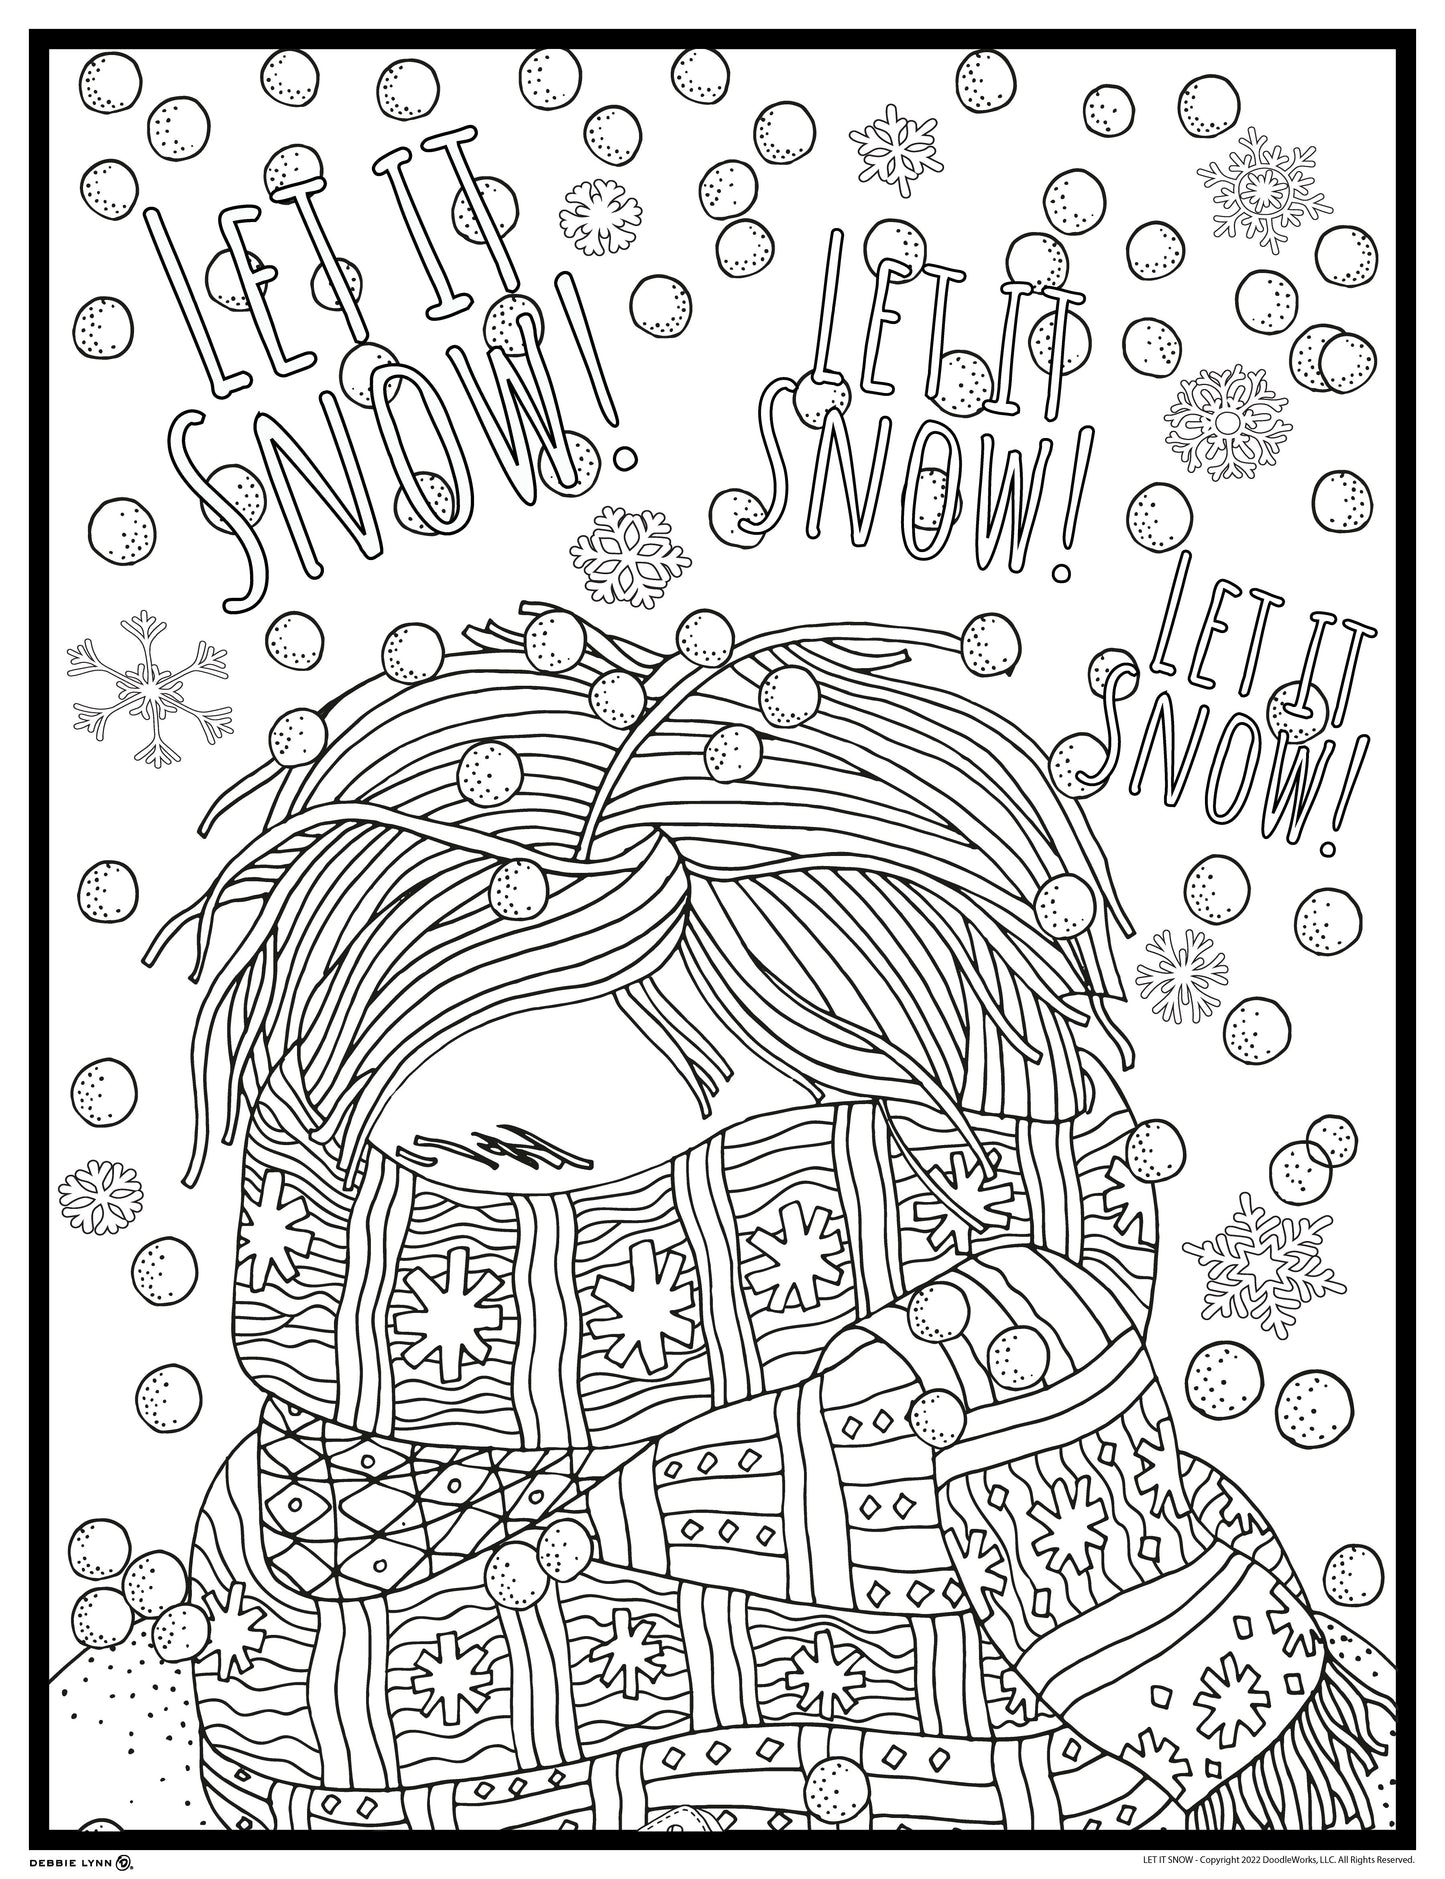 Let It Snow Personalized Giant Coloring Poster 46"x60"